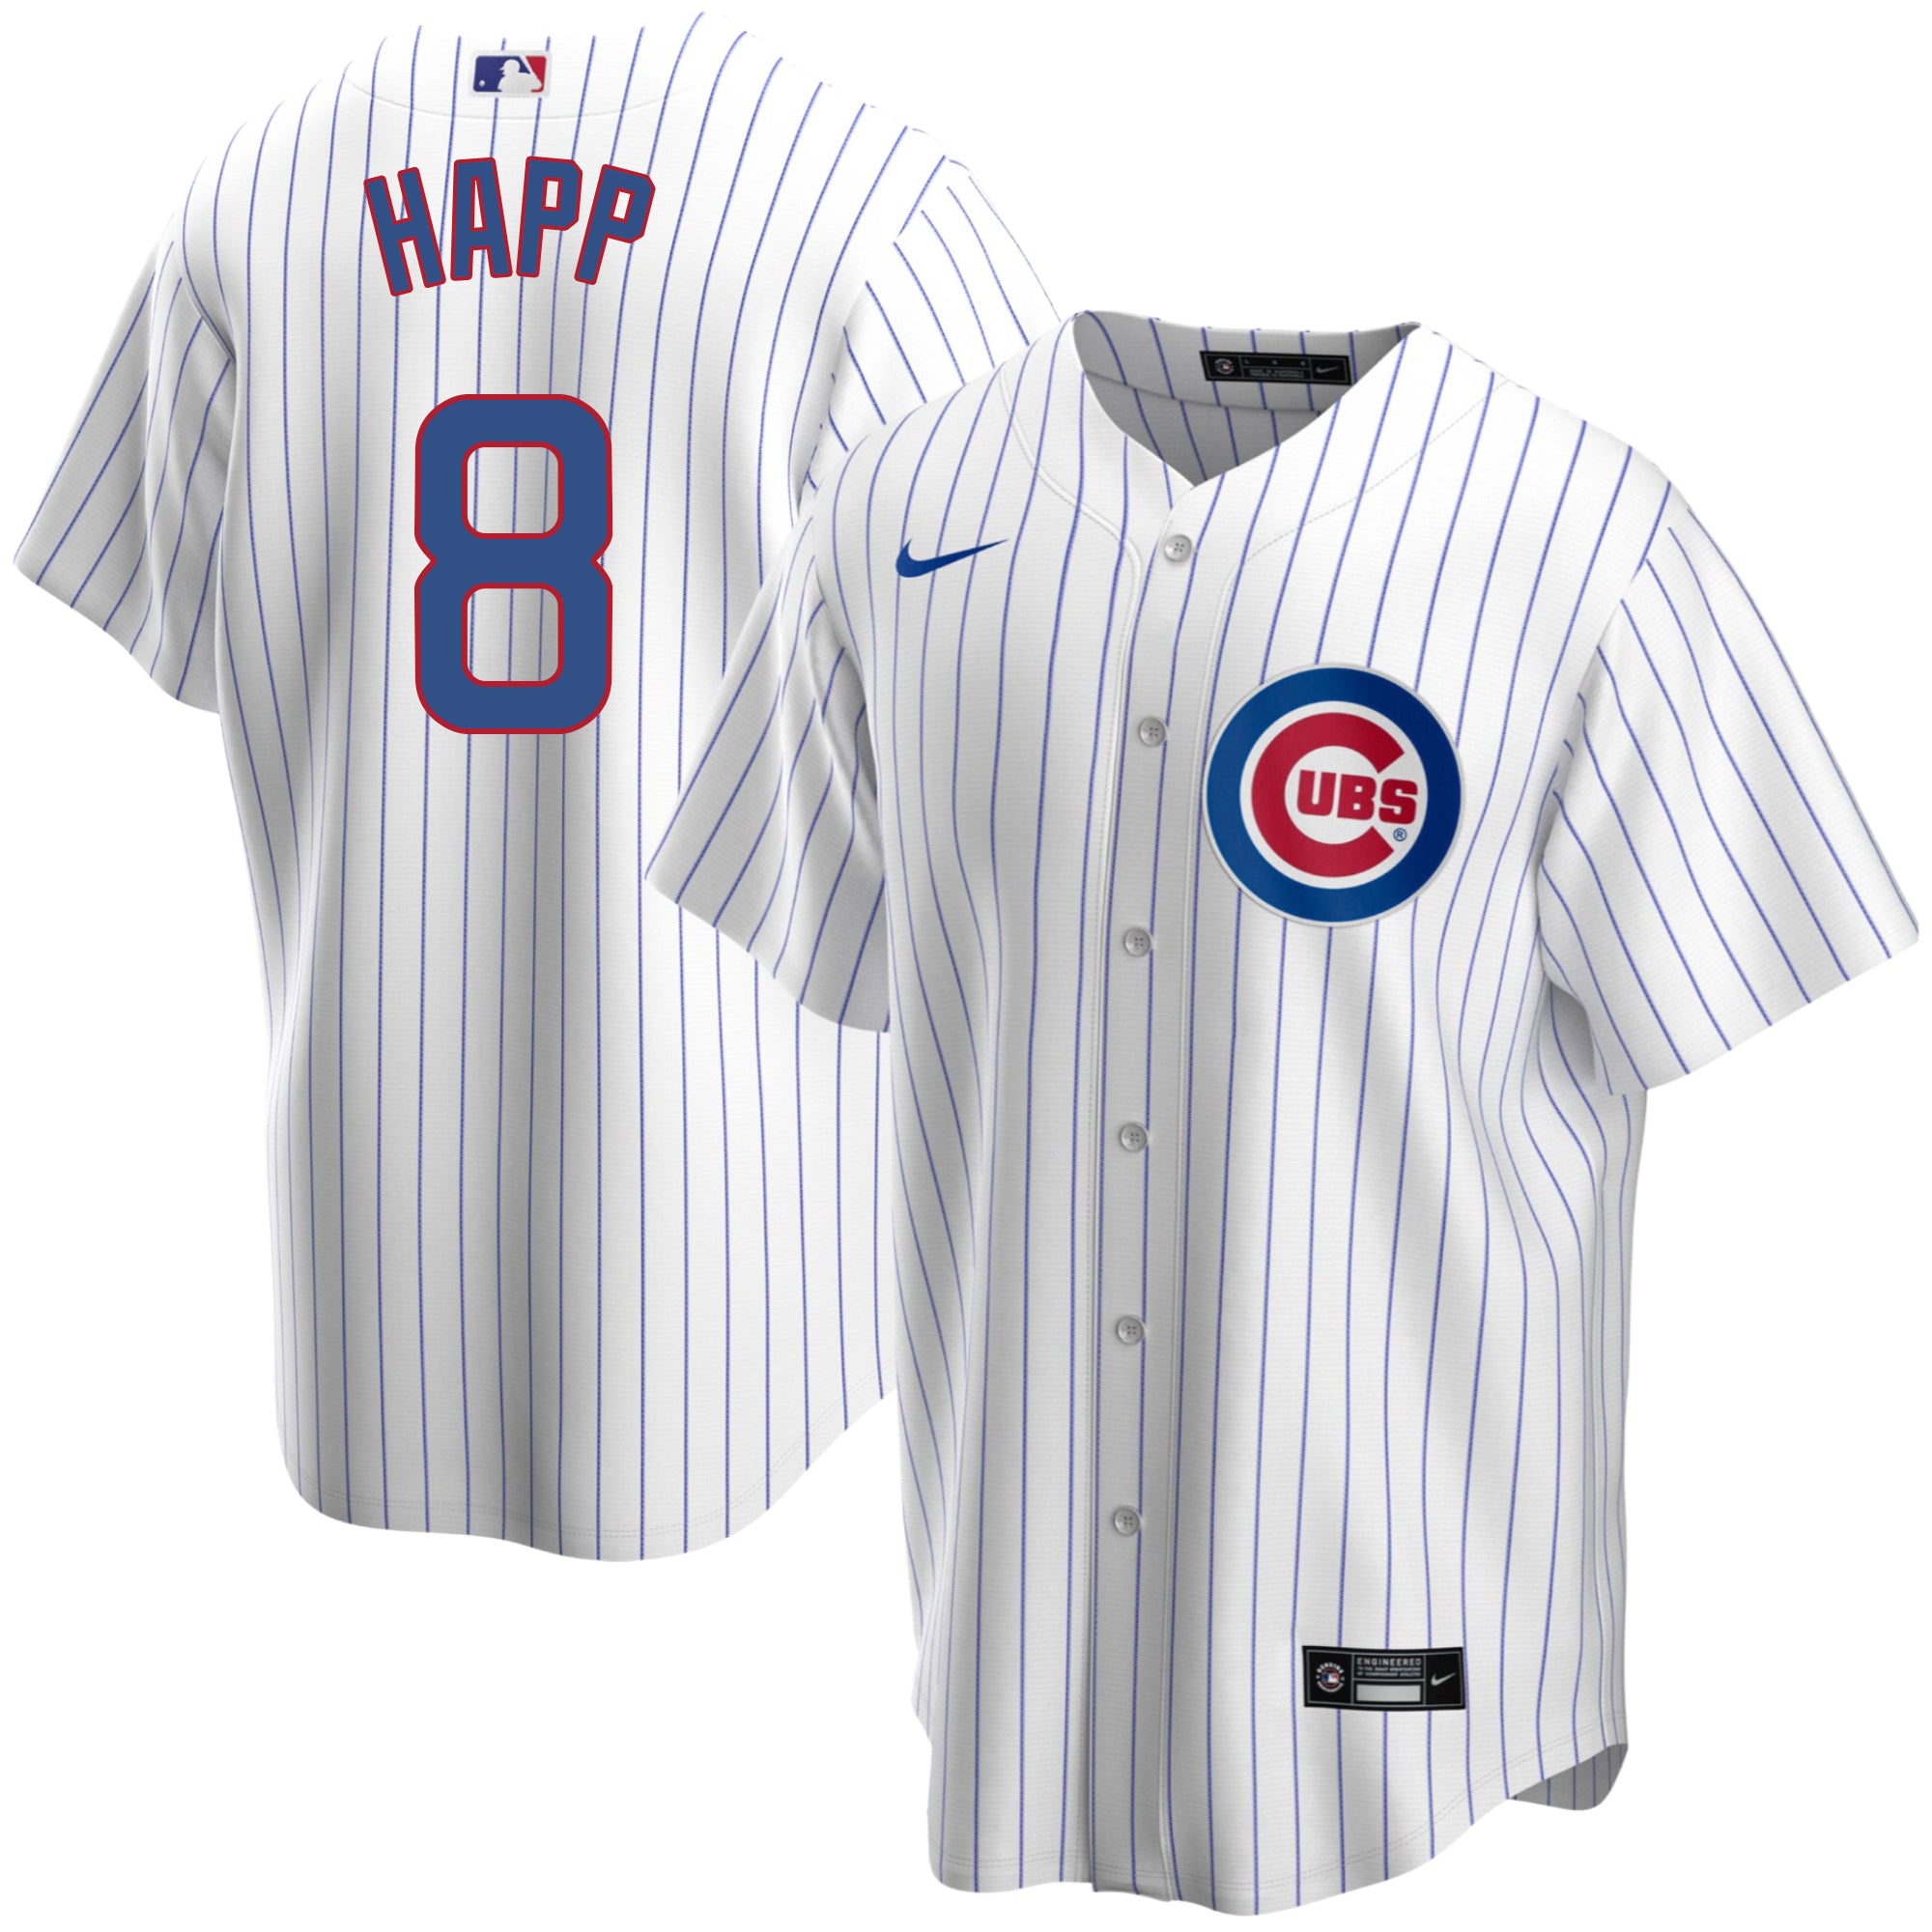 South Bend Cubs Infant/Toddler Replica Pinstripe Jersey 